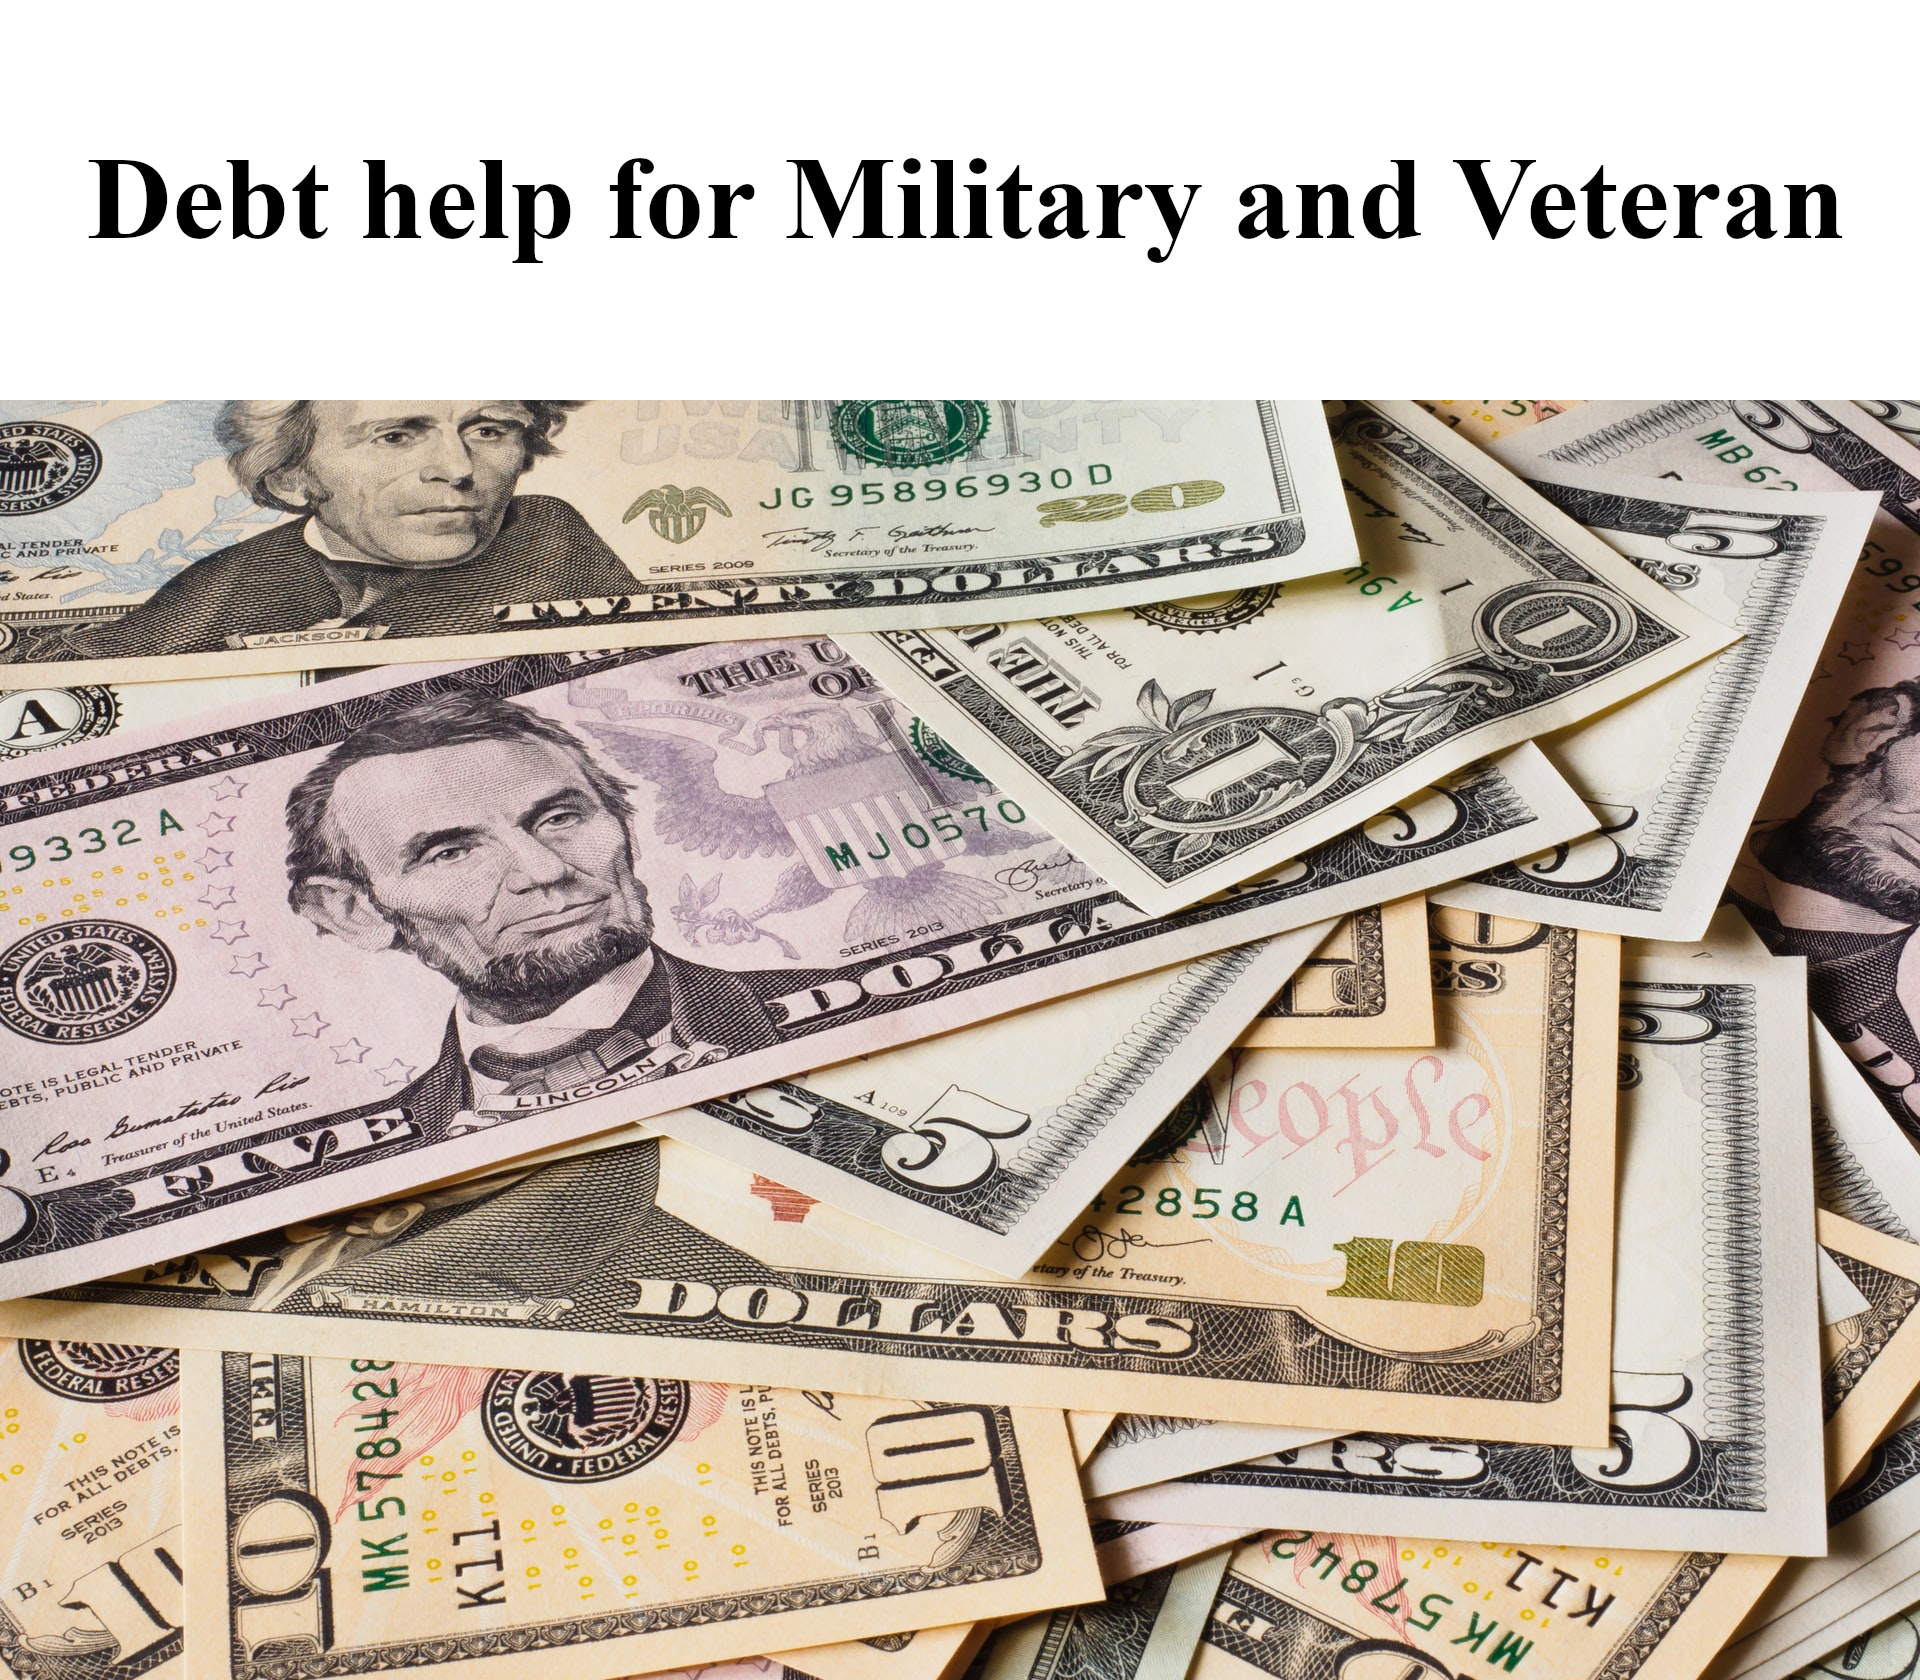 Debt help for Military and Veteran